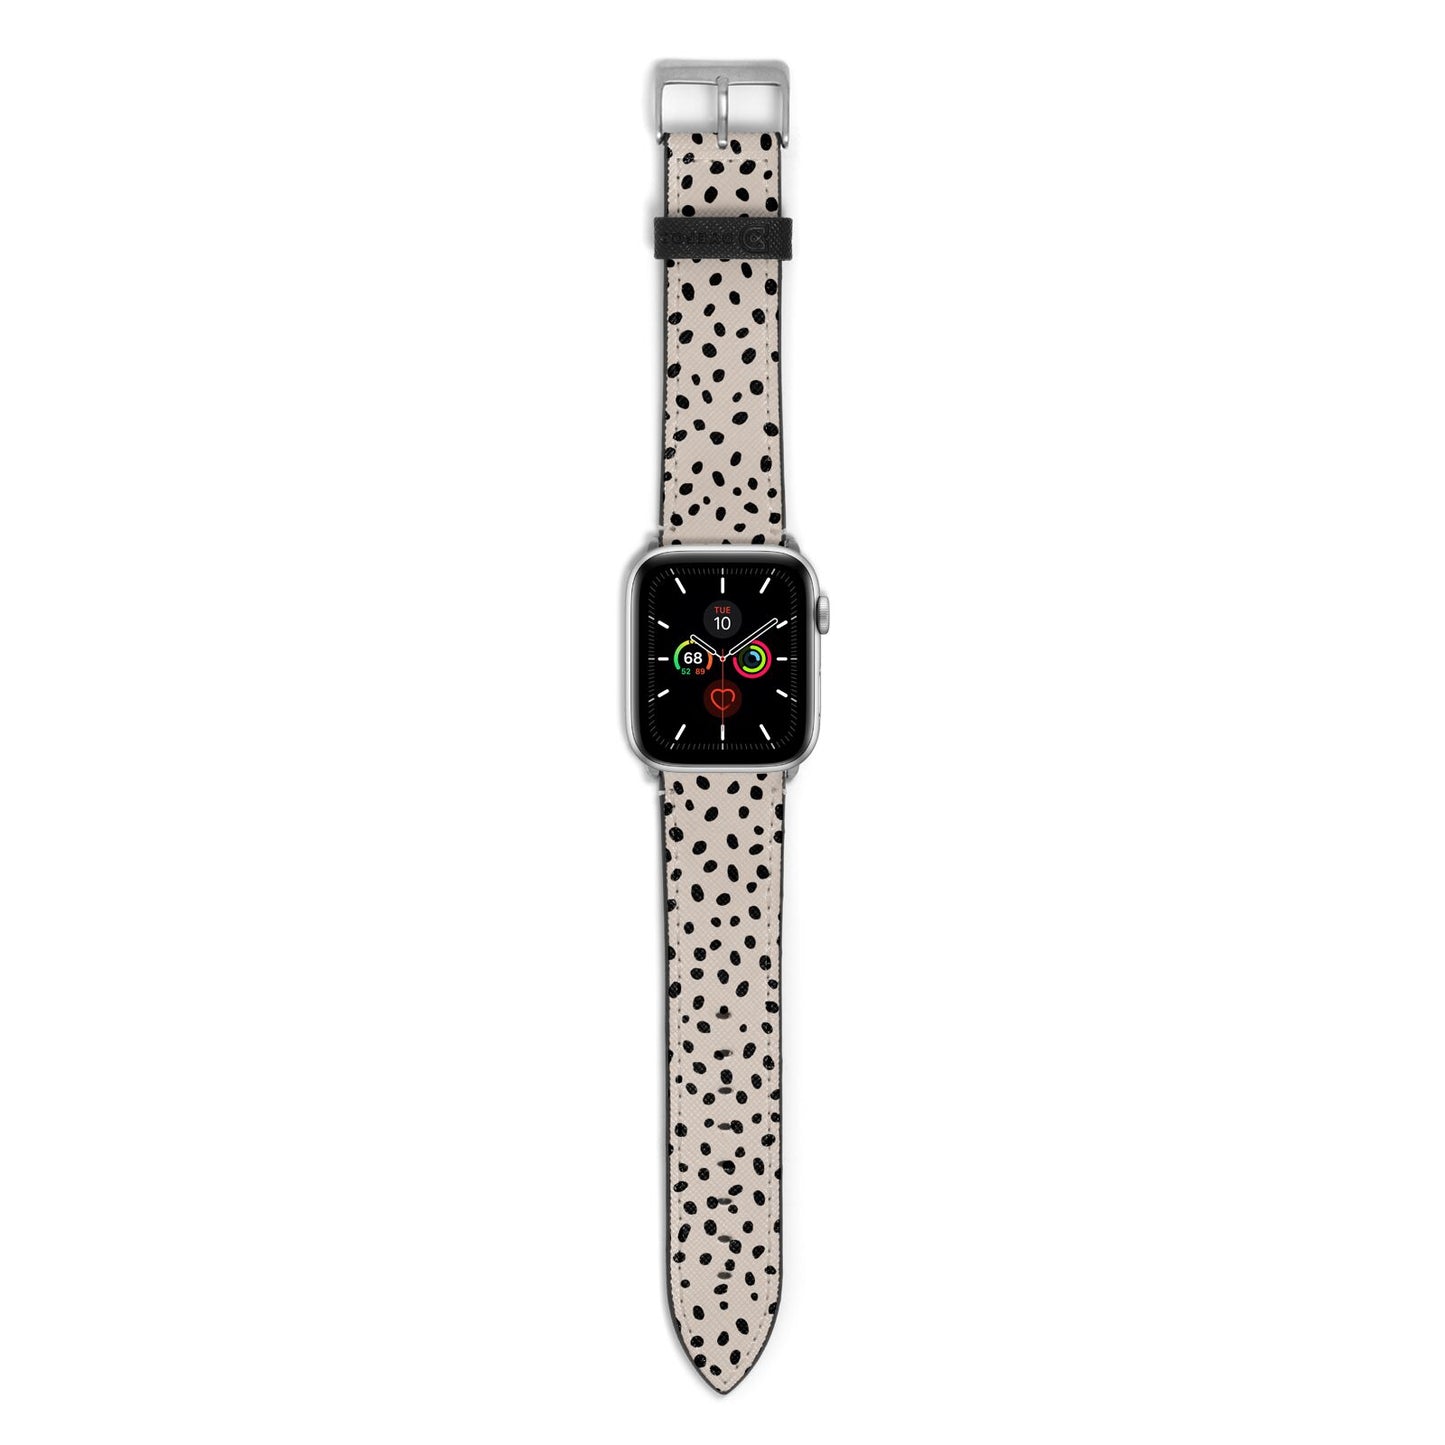 Almond Polka Dot Apple Watch Strap with Silver Hardware